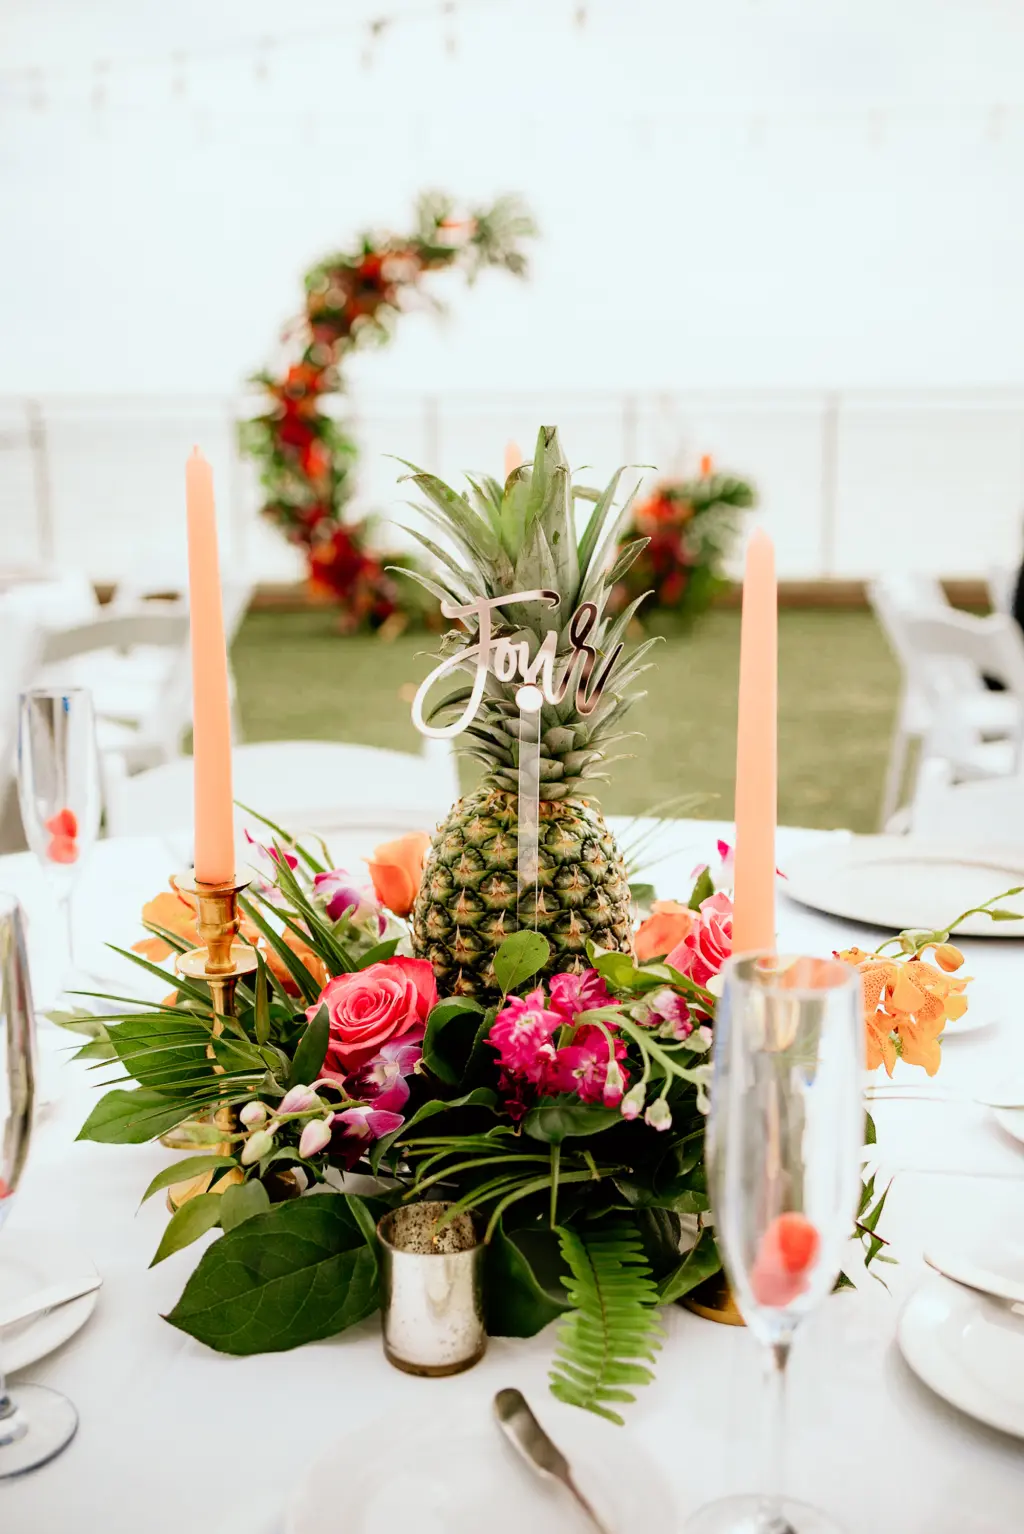 Tropical Wedding Inspiration with Pineapple and Monstera Leaf Centerpieces | Coral Tapered Candles with Gold Accents | Clearwater Beach Florist Save the Date Florida